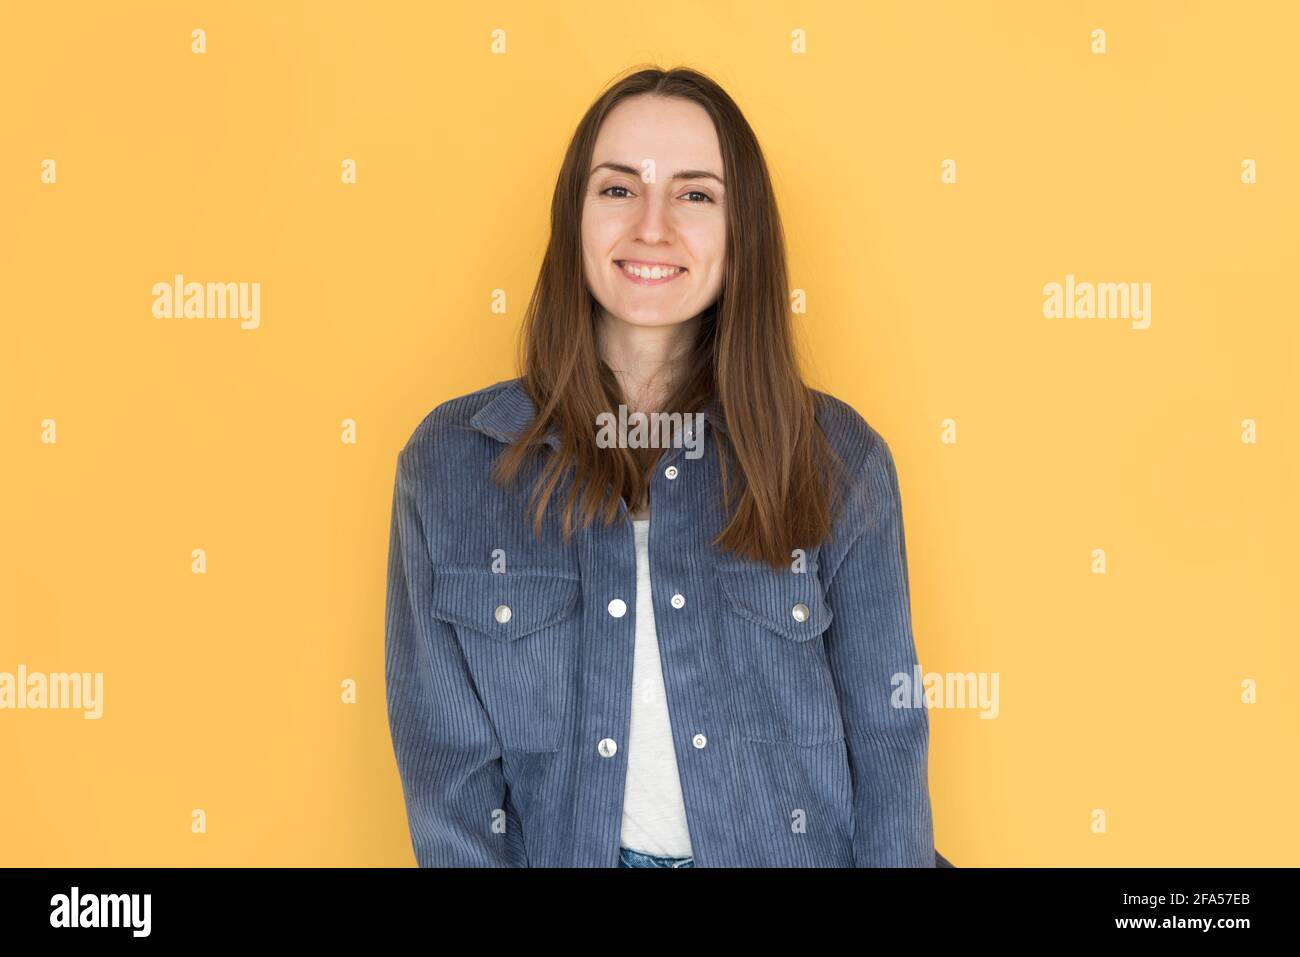 Young girl smiling on yellow background Stock Photo